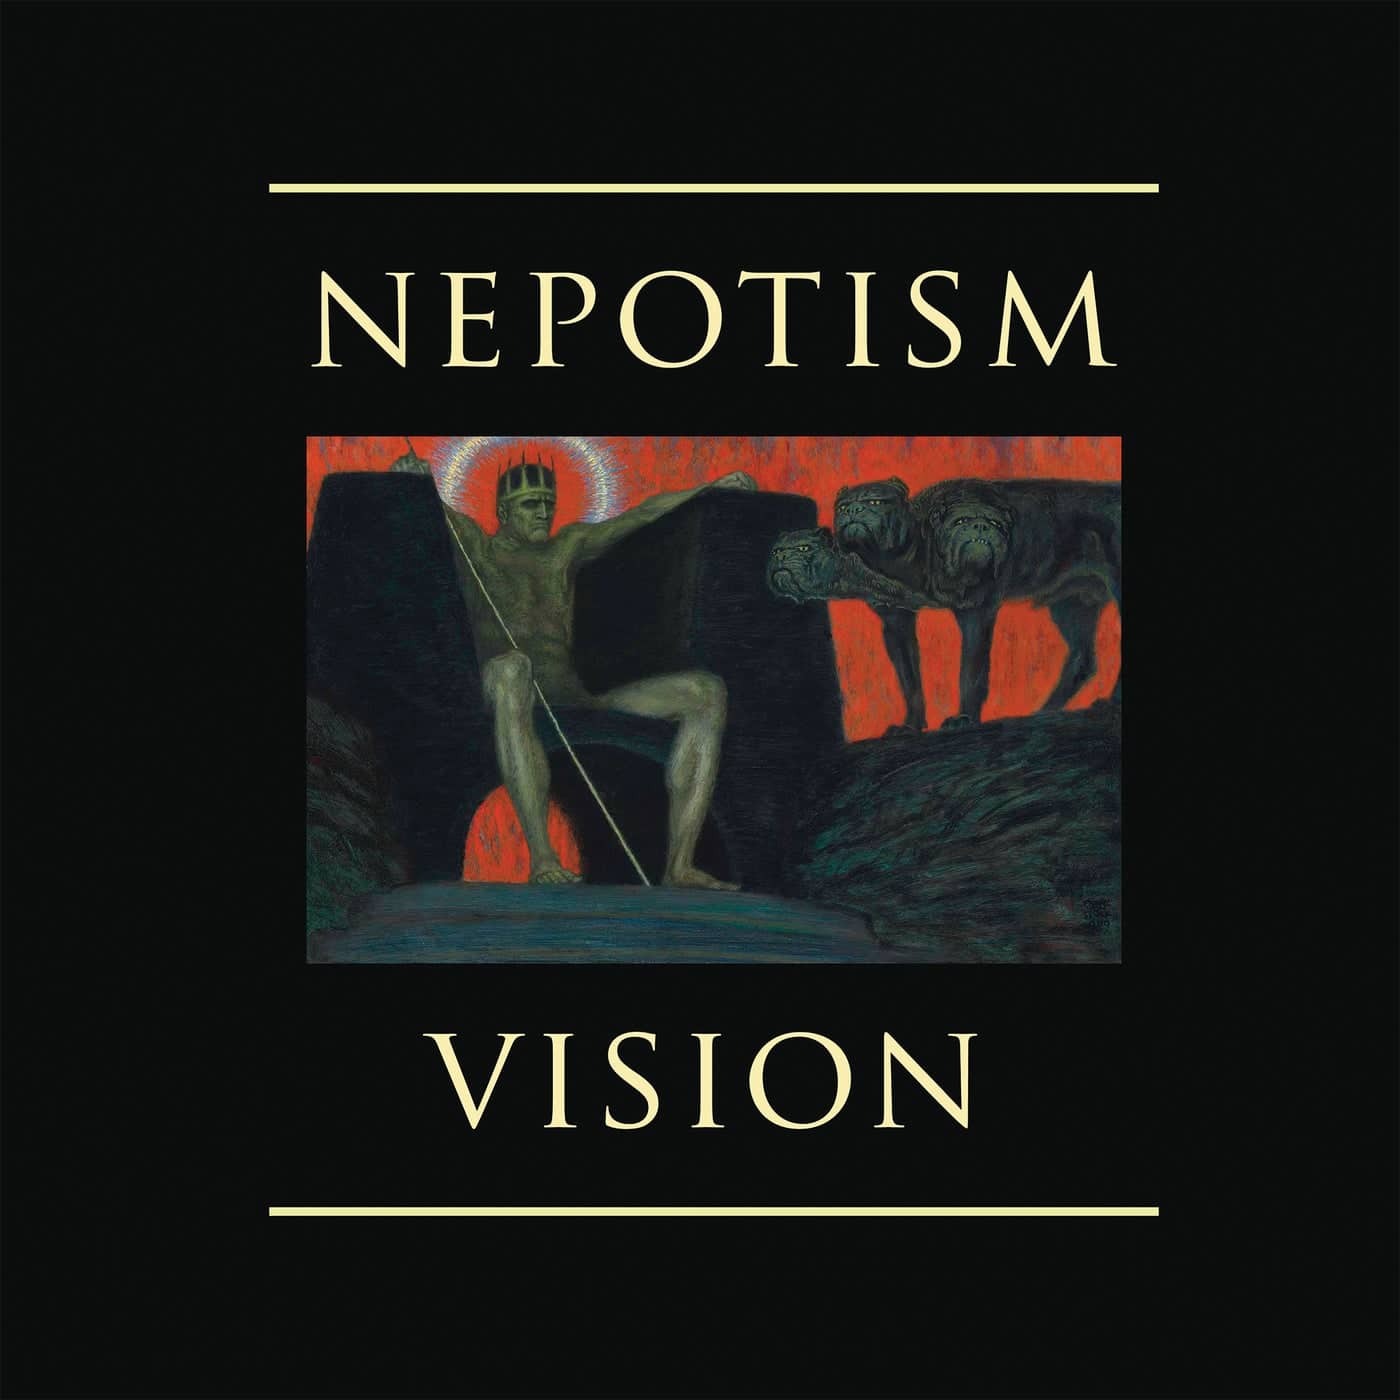 Download Nepotism Vision on Electrobuzz